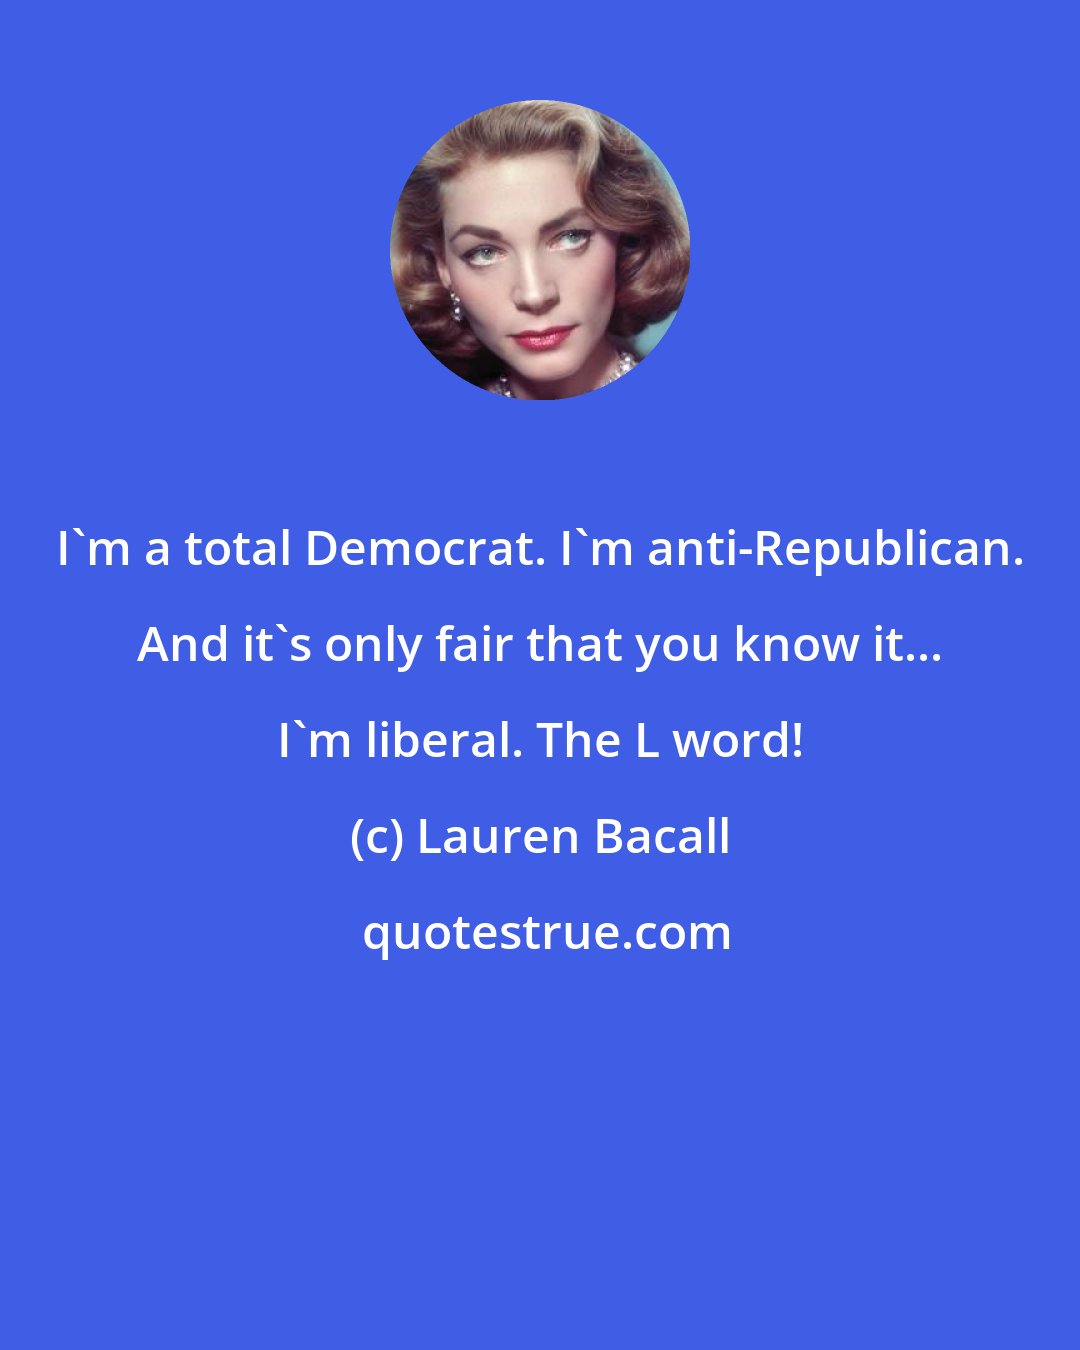 Lauren Bacall: I'm a total Democrat. I'm anti-Republican. And it's only fair that you know it... I'm liberal. The L word!